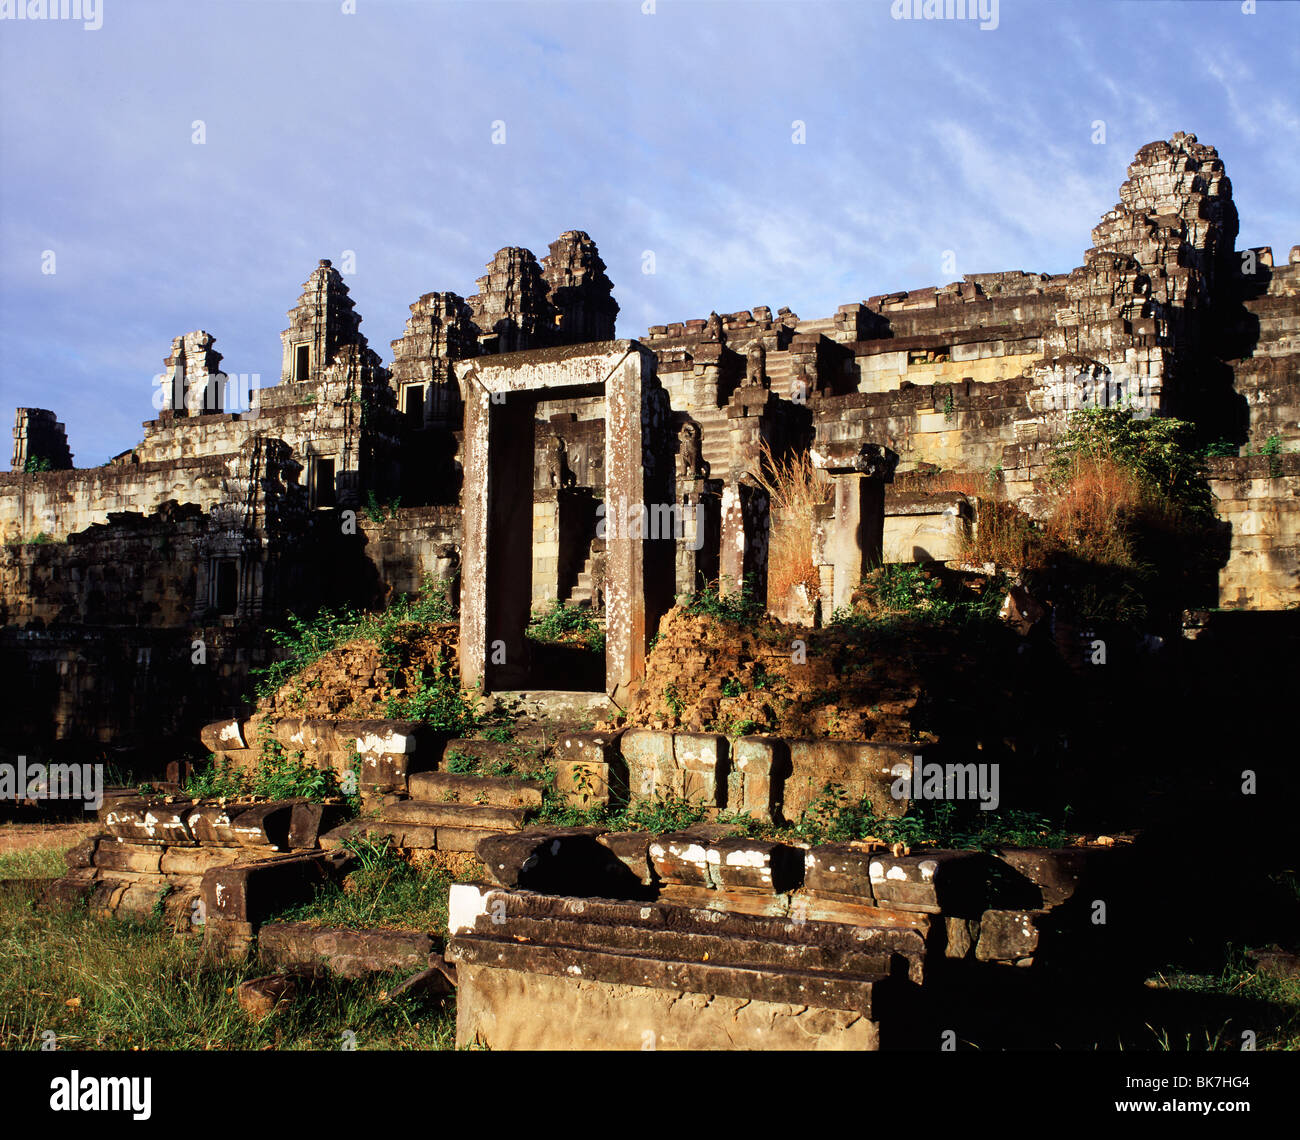 Phnom Bakheng dating from the late 9th and early 10th centuries, Angkor, UNESCO World Heritage Site, Cambodia Stock Photo